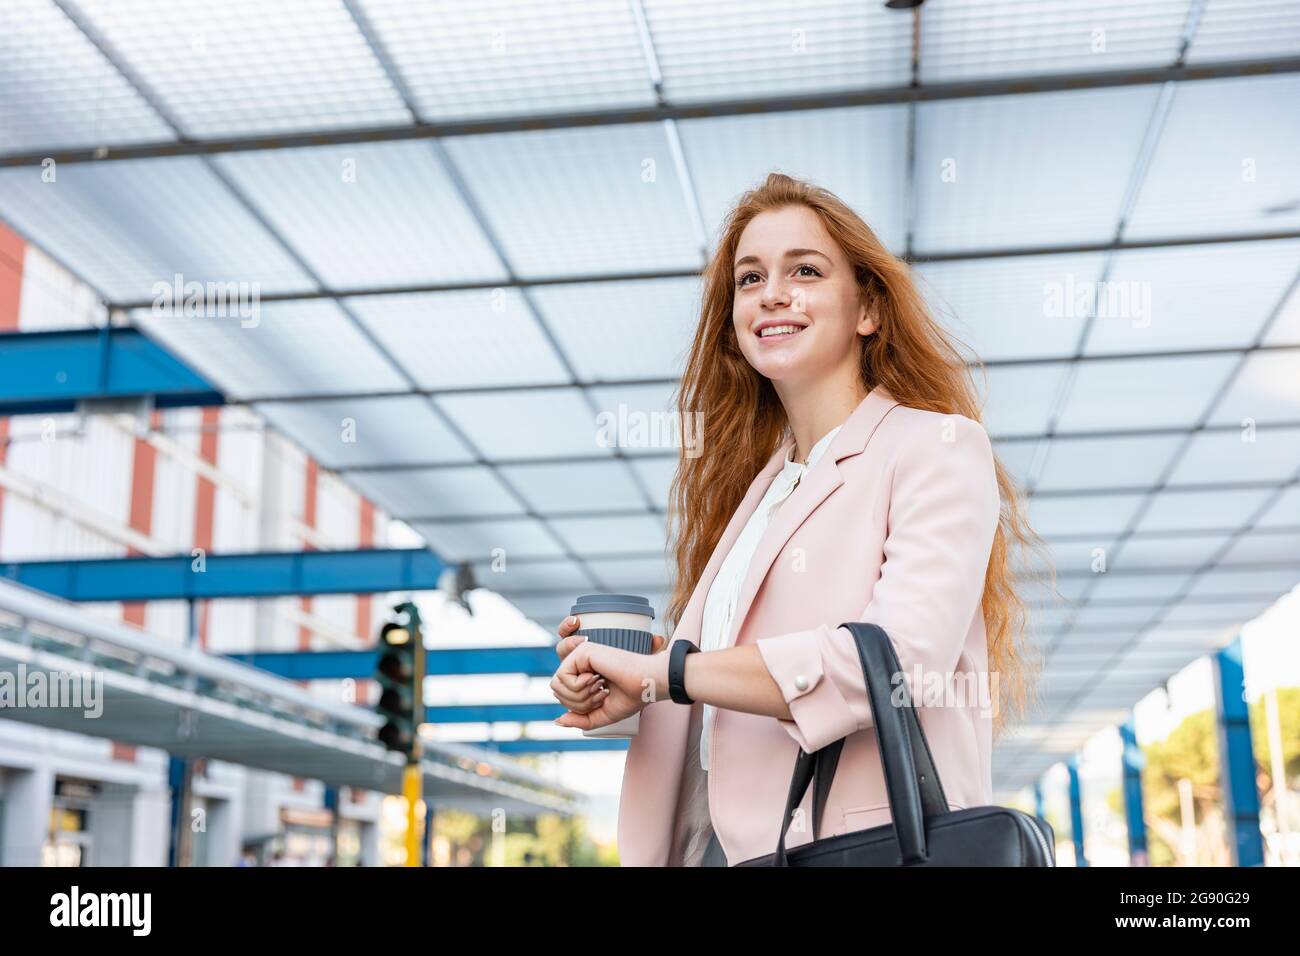 Smiling female professional looking away while waiting on platform Stock Photo